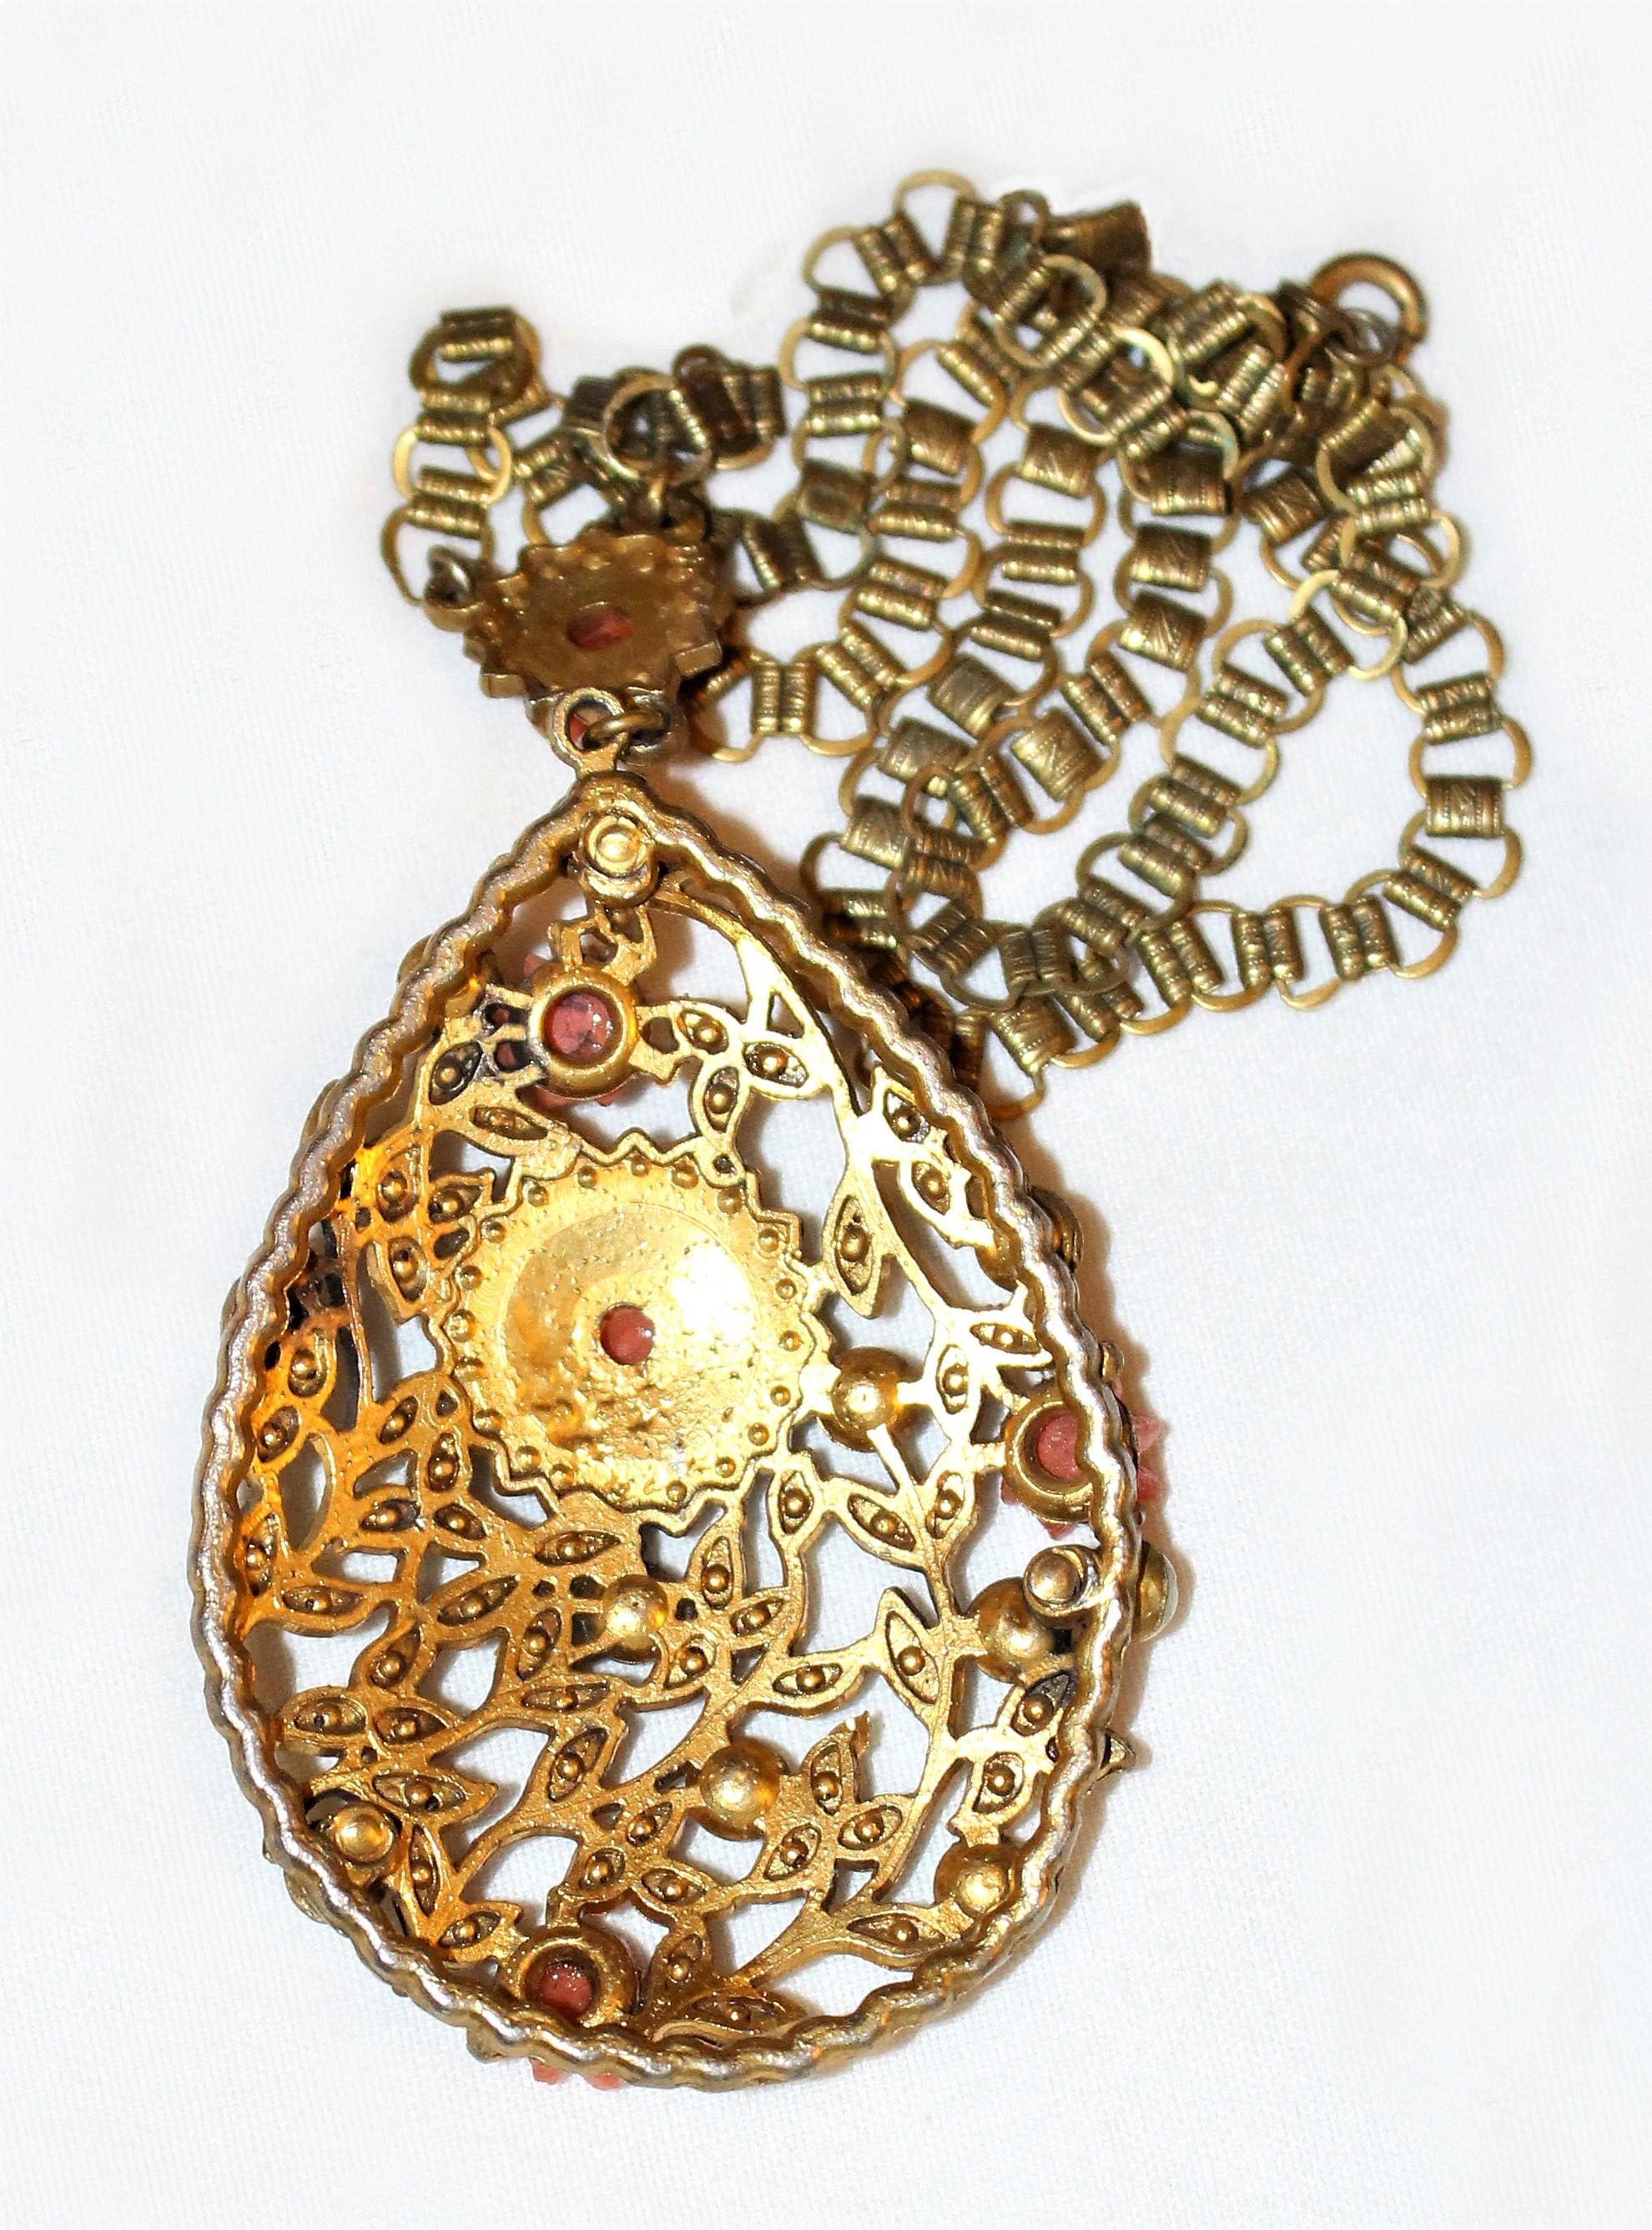 Circa 1930 Book-Chain Necklace With Jeweled Pendant  In Good Condition For Sale In Long Beach, CA